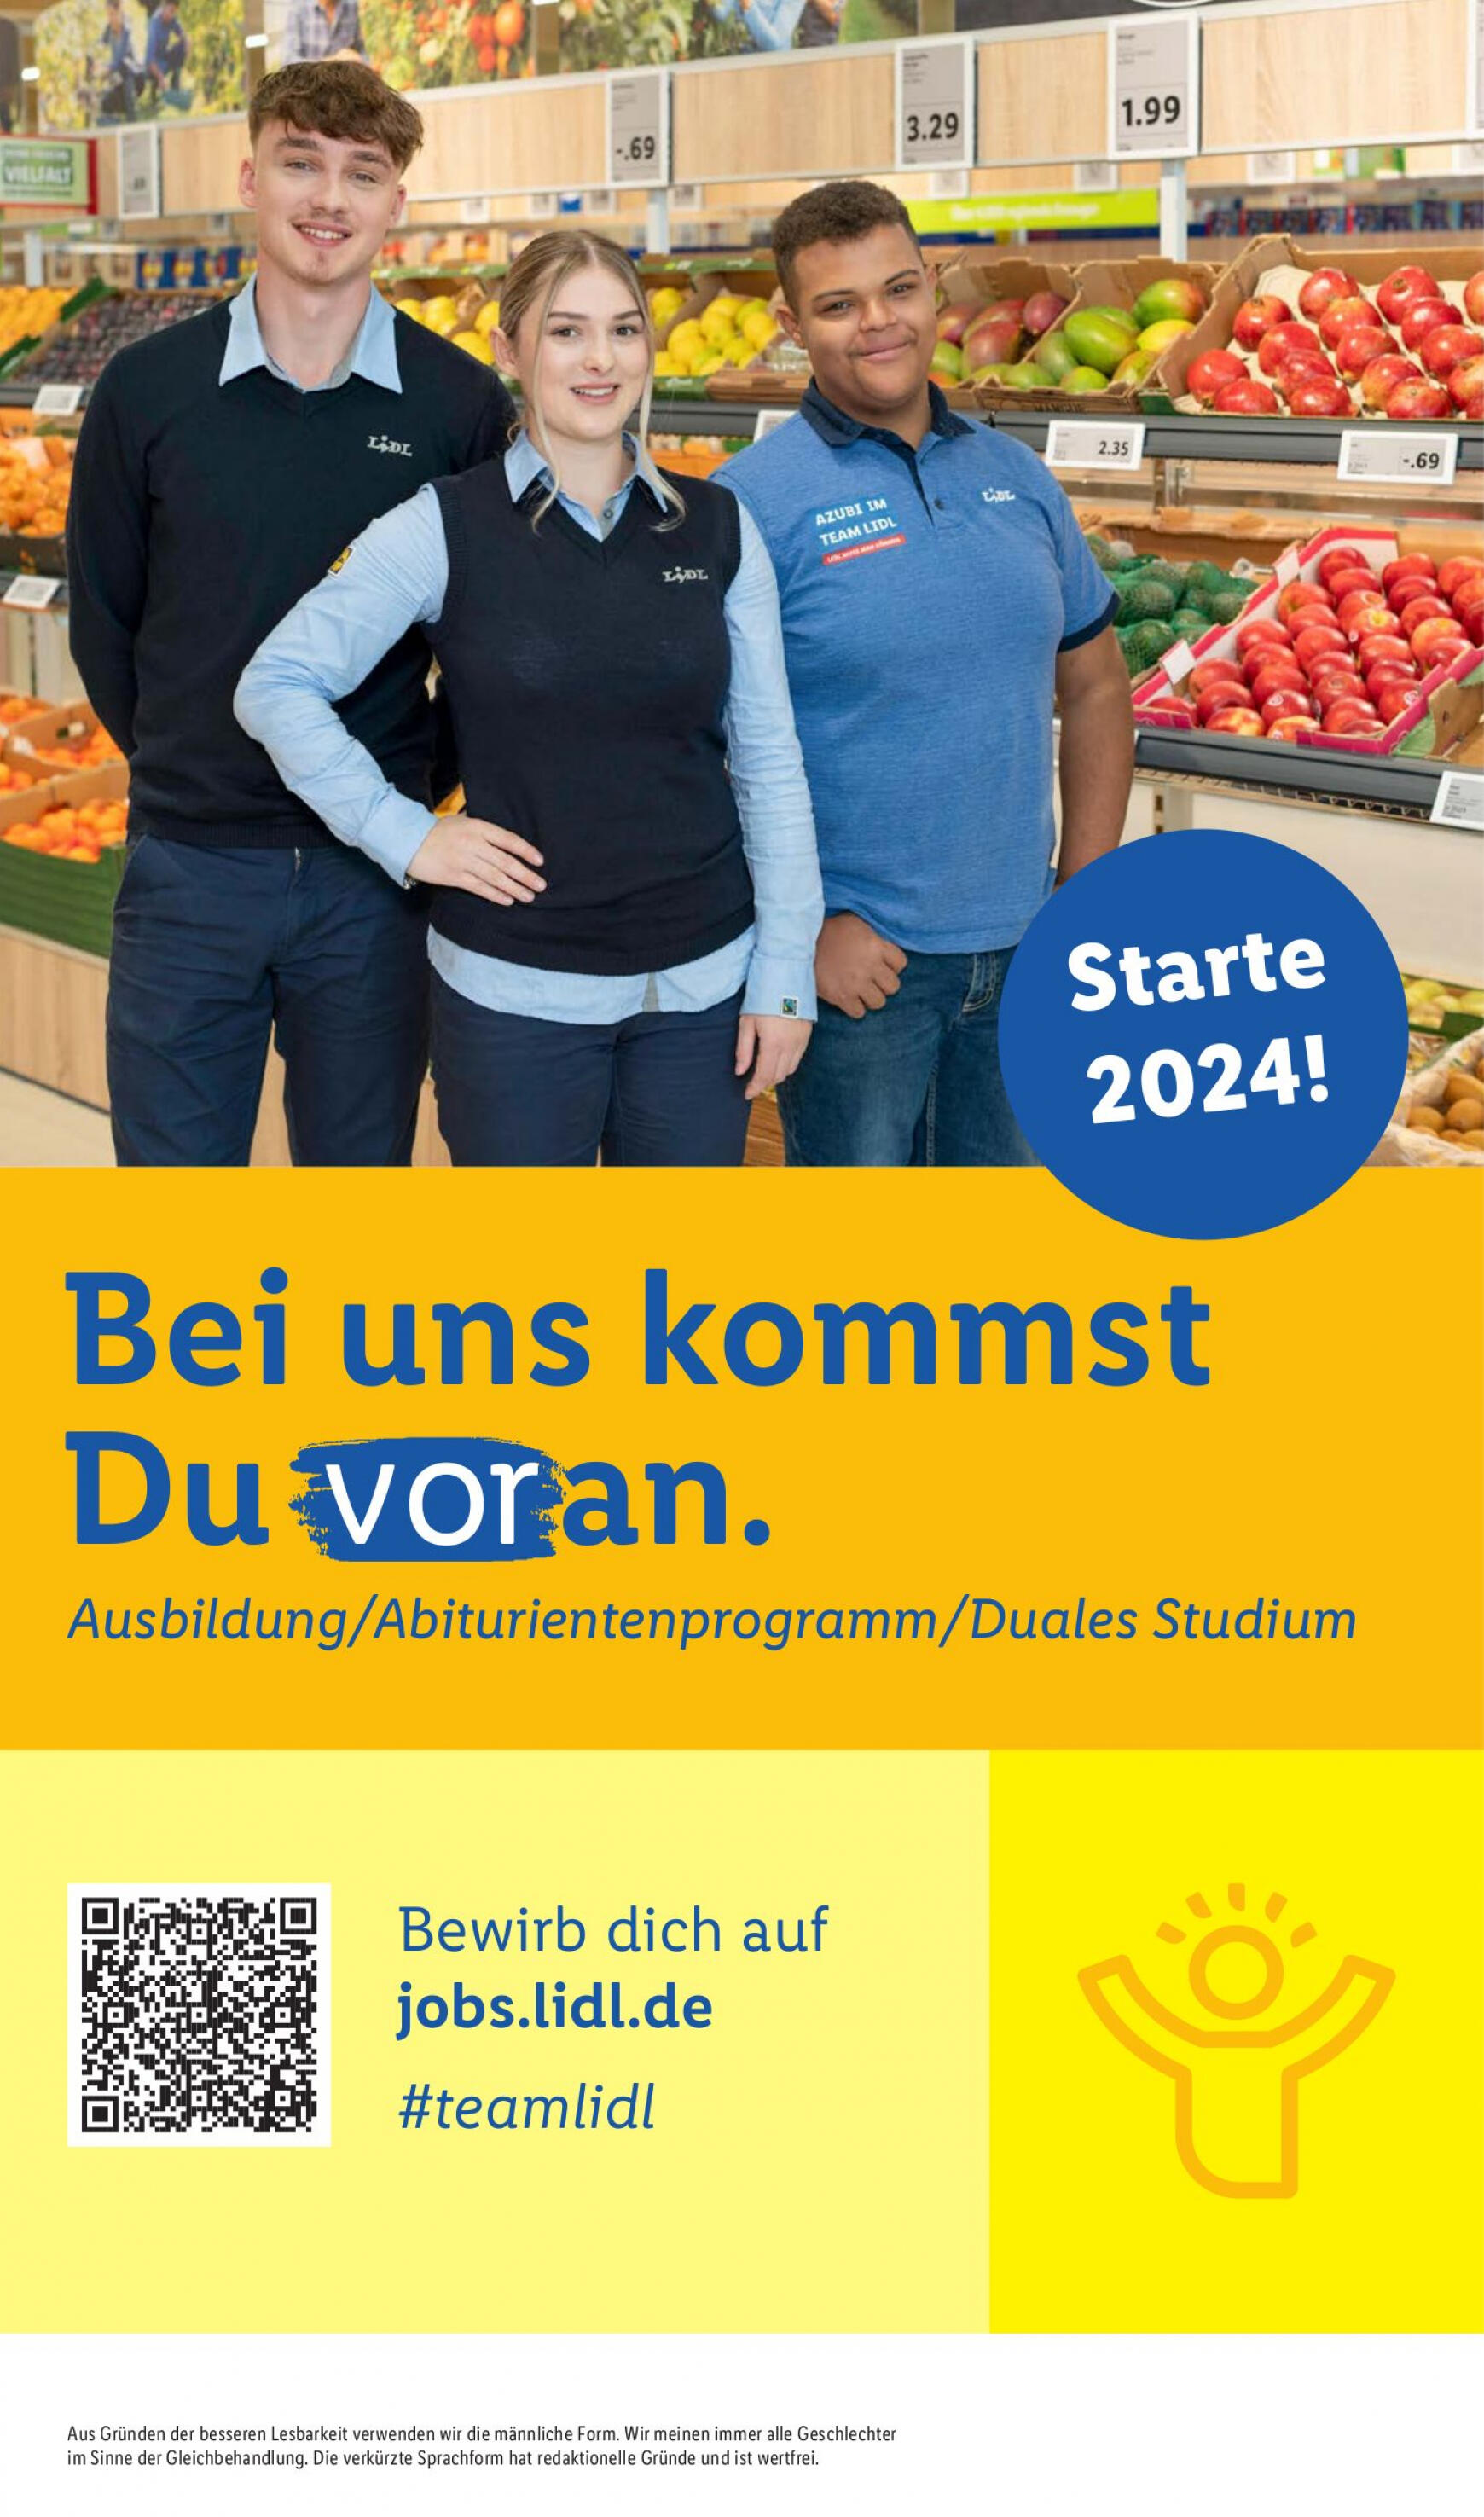 lidl - Flyer Lidl aktuell 22.04. - 27.04. - page: 55